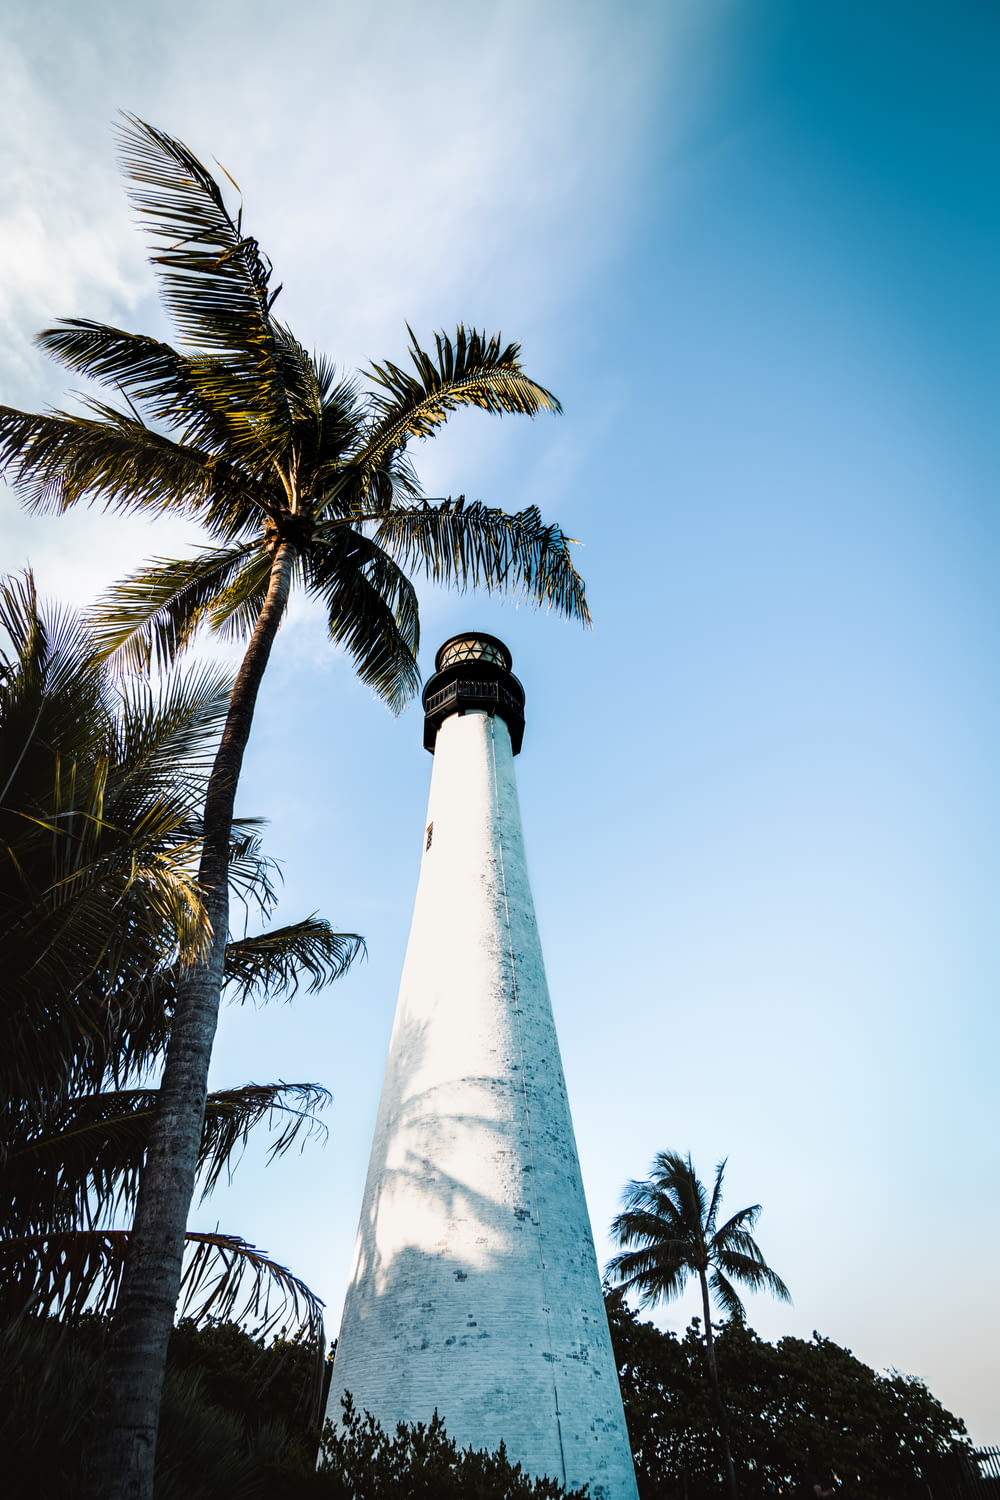 a tall white light house sitting next to a palm tree